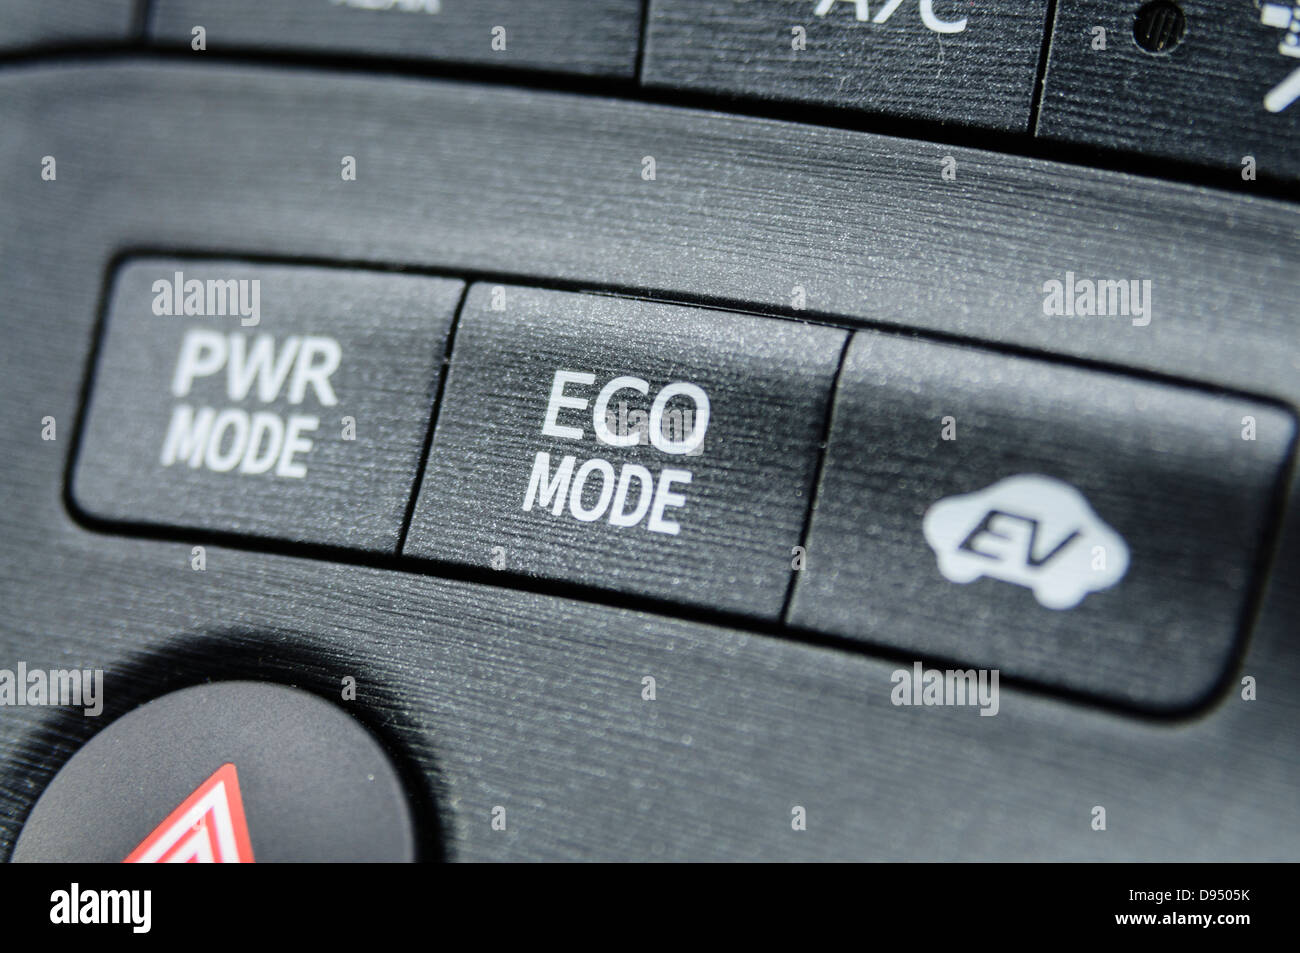 Power mode, Eco mode, and Electric Vehicle (EV) mode buttons on a 2012 Toyota Prius Stock Photo